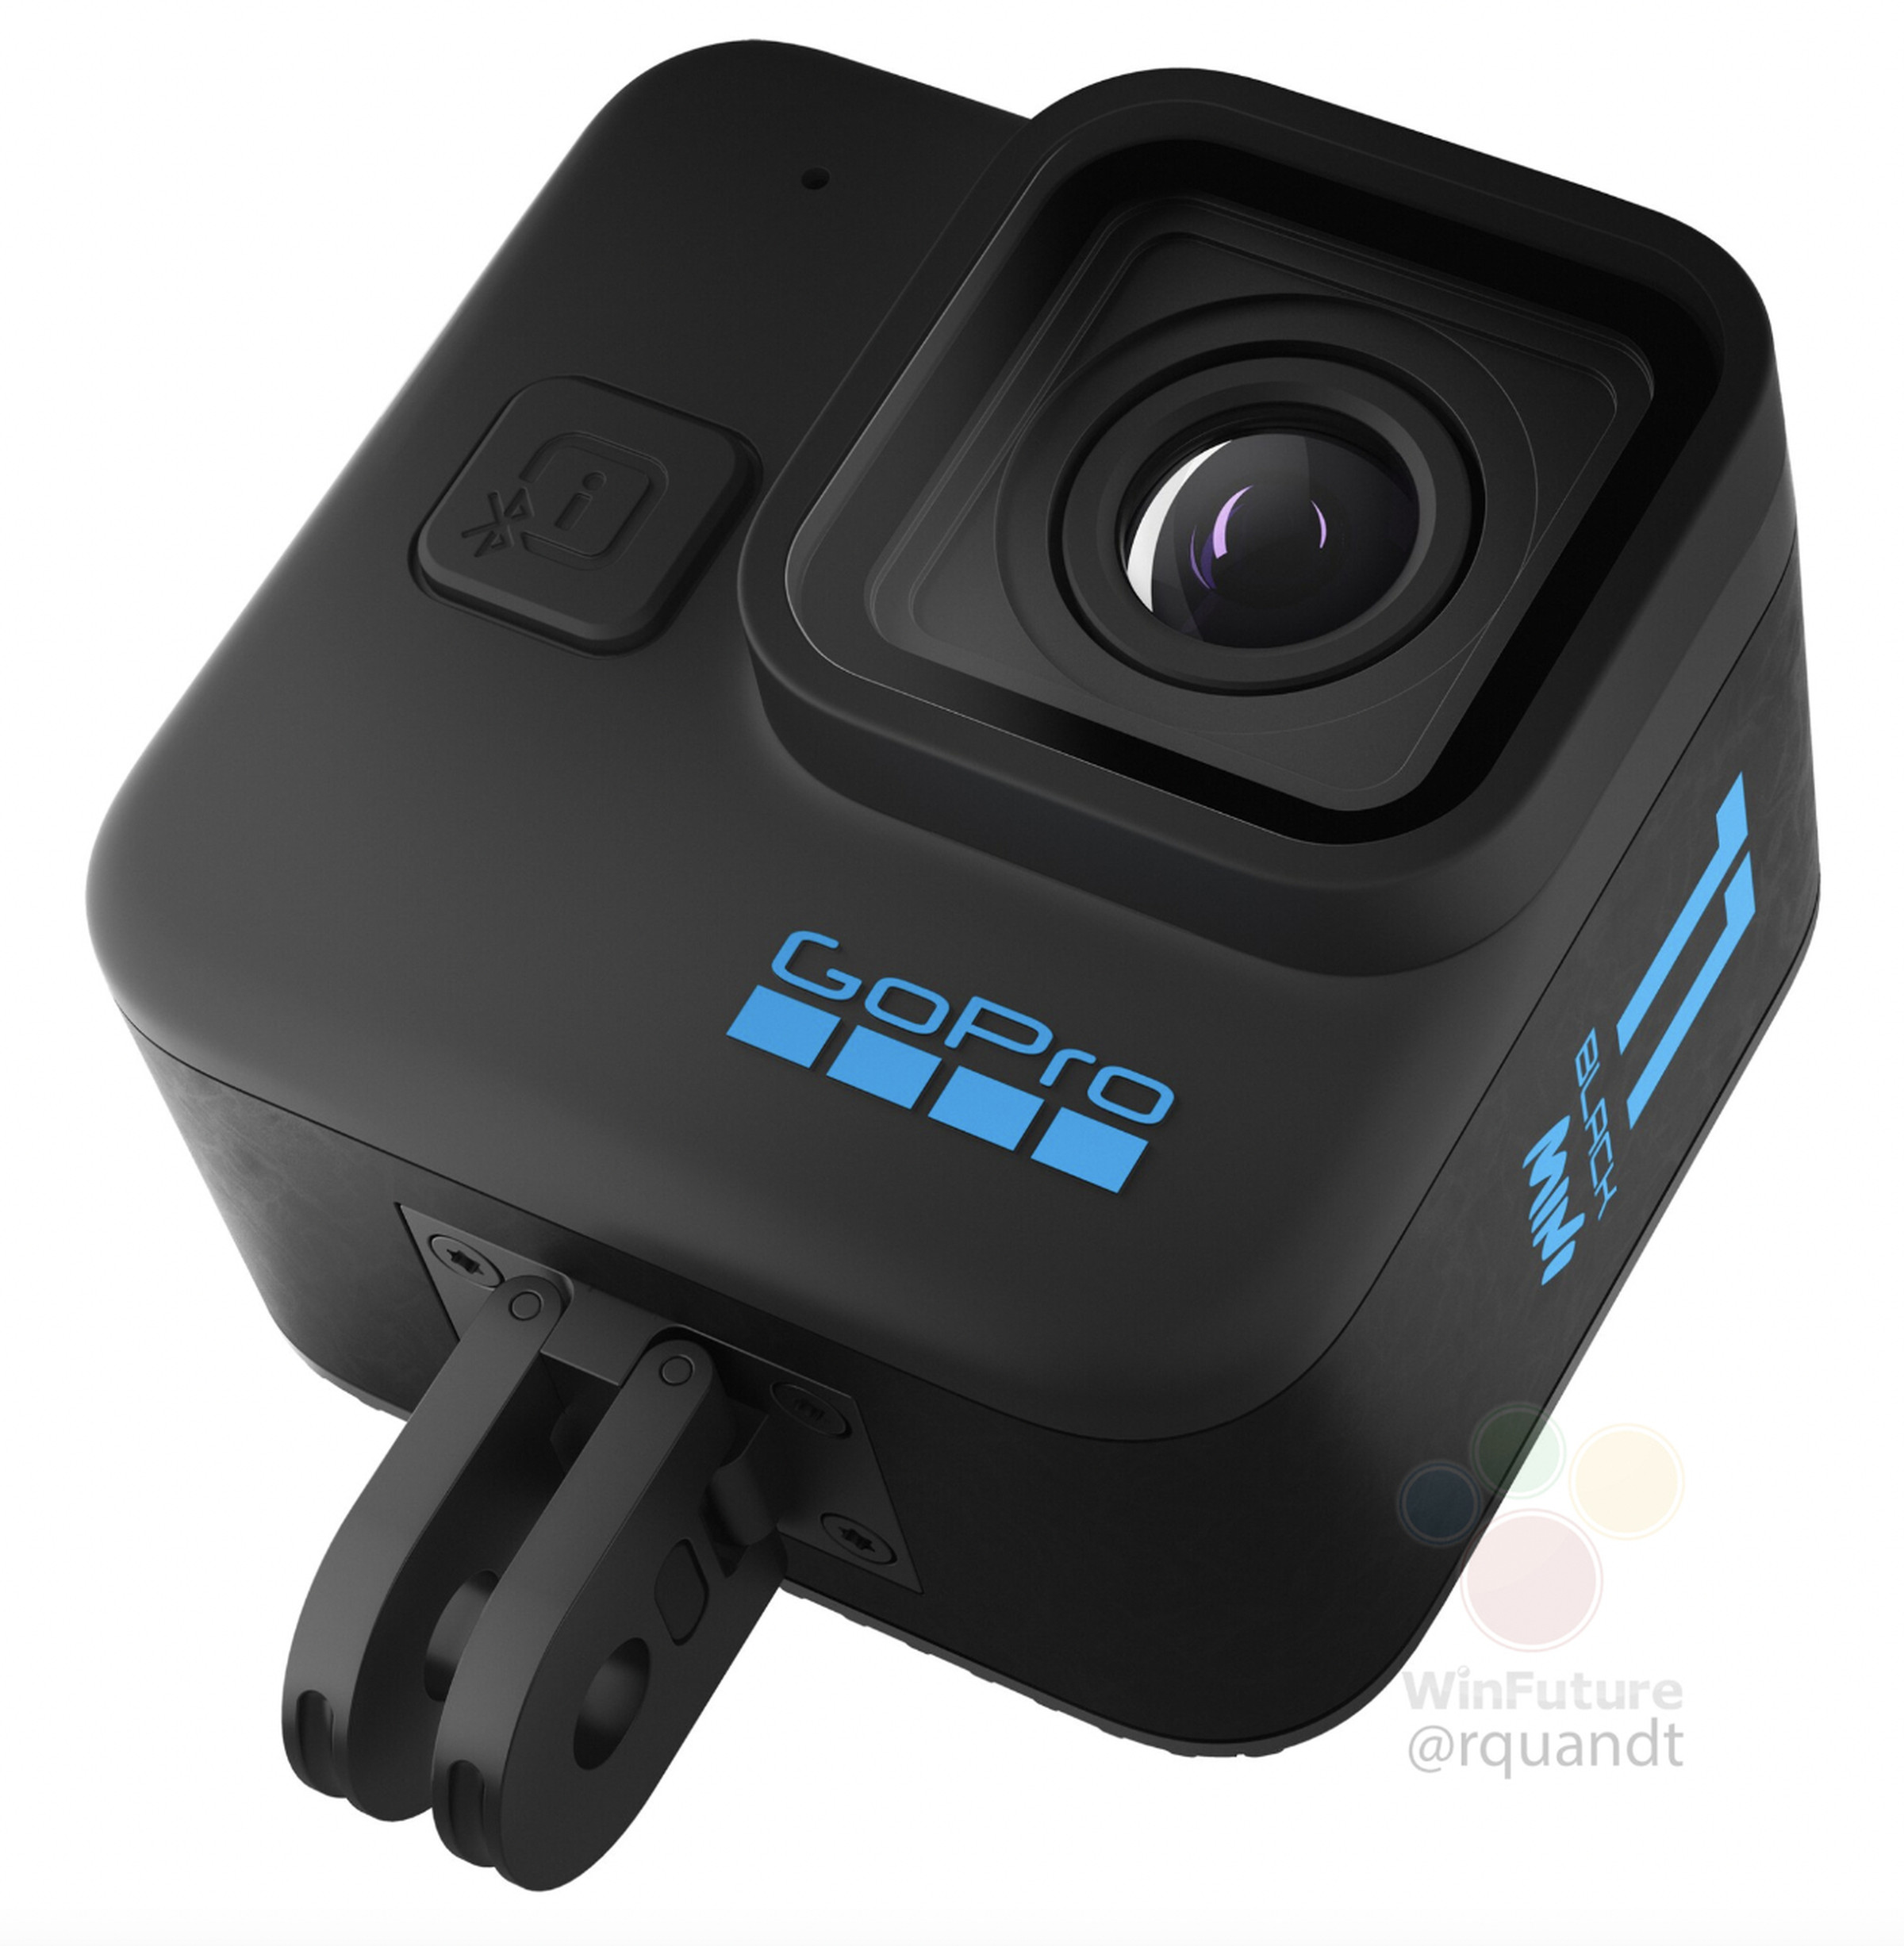 Leaked image shows the GoPro Hero 11 Black Mini at an angle